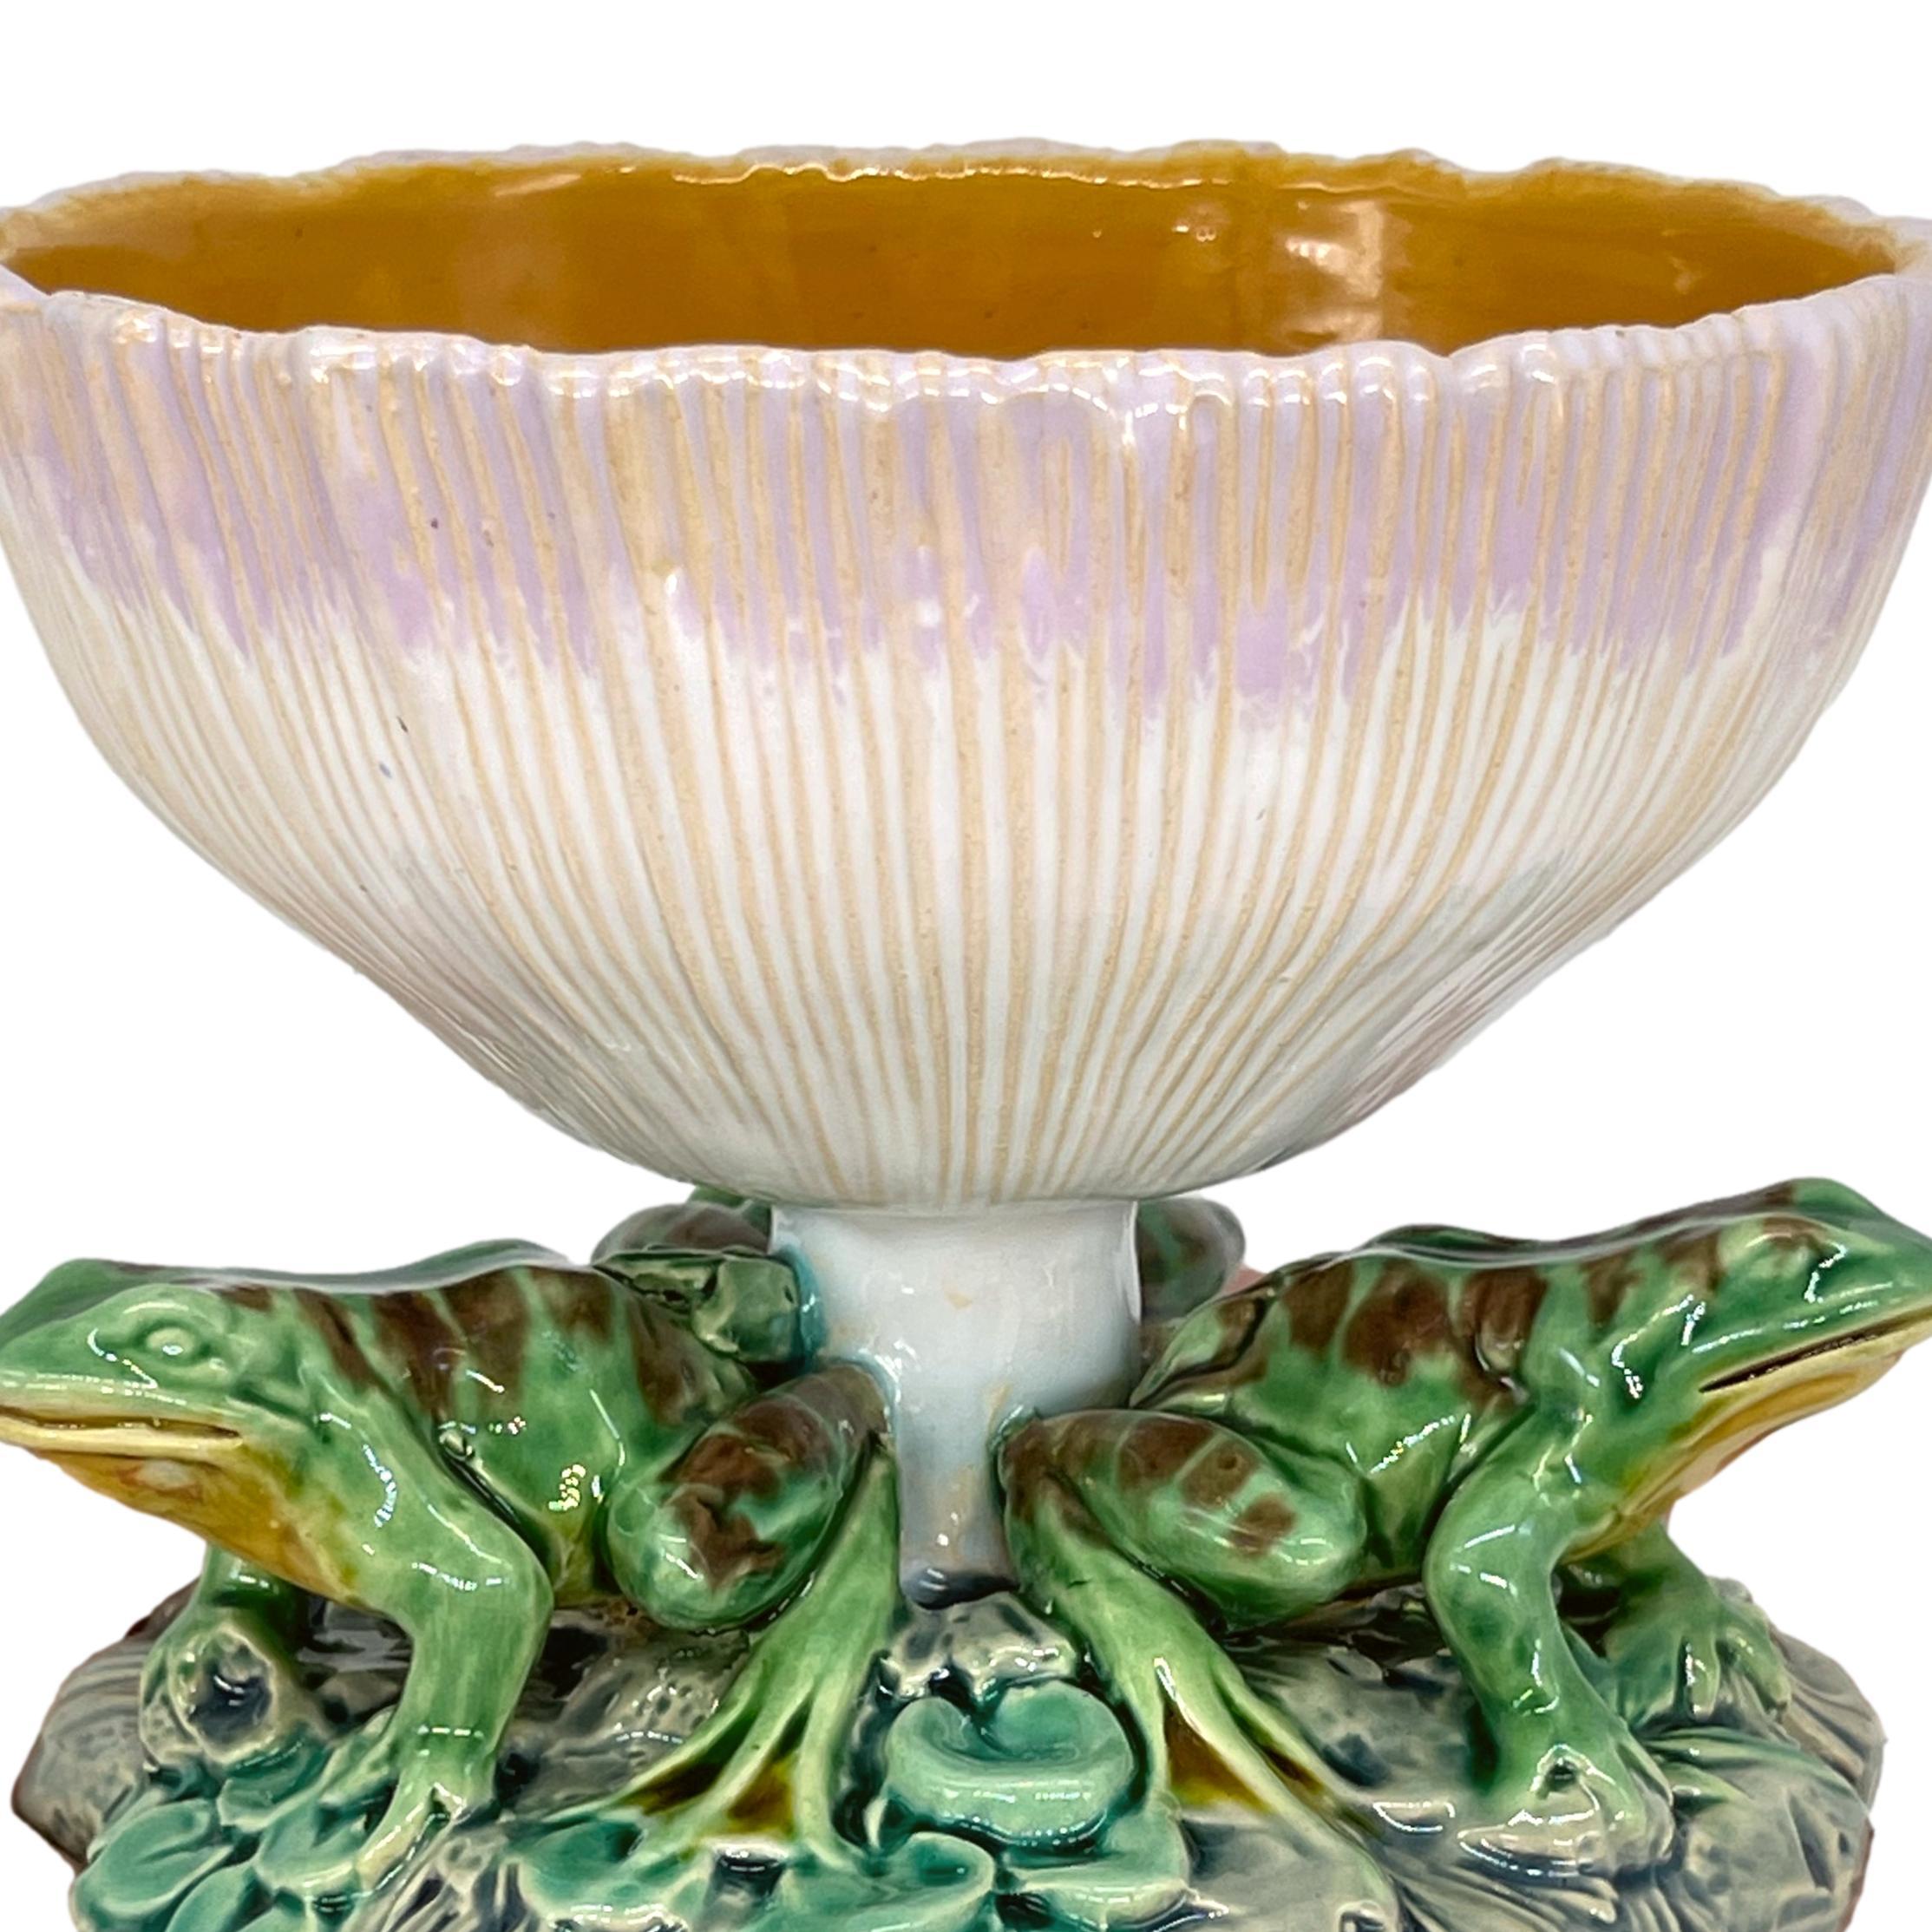 Minton Majolica Mushroom Tazza with Three-Frog Base, English, Dated 1868 For Sale 1